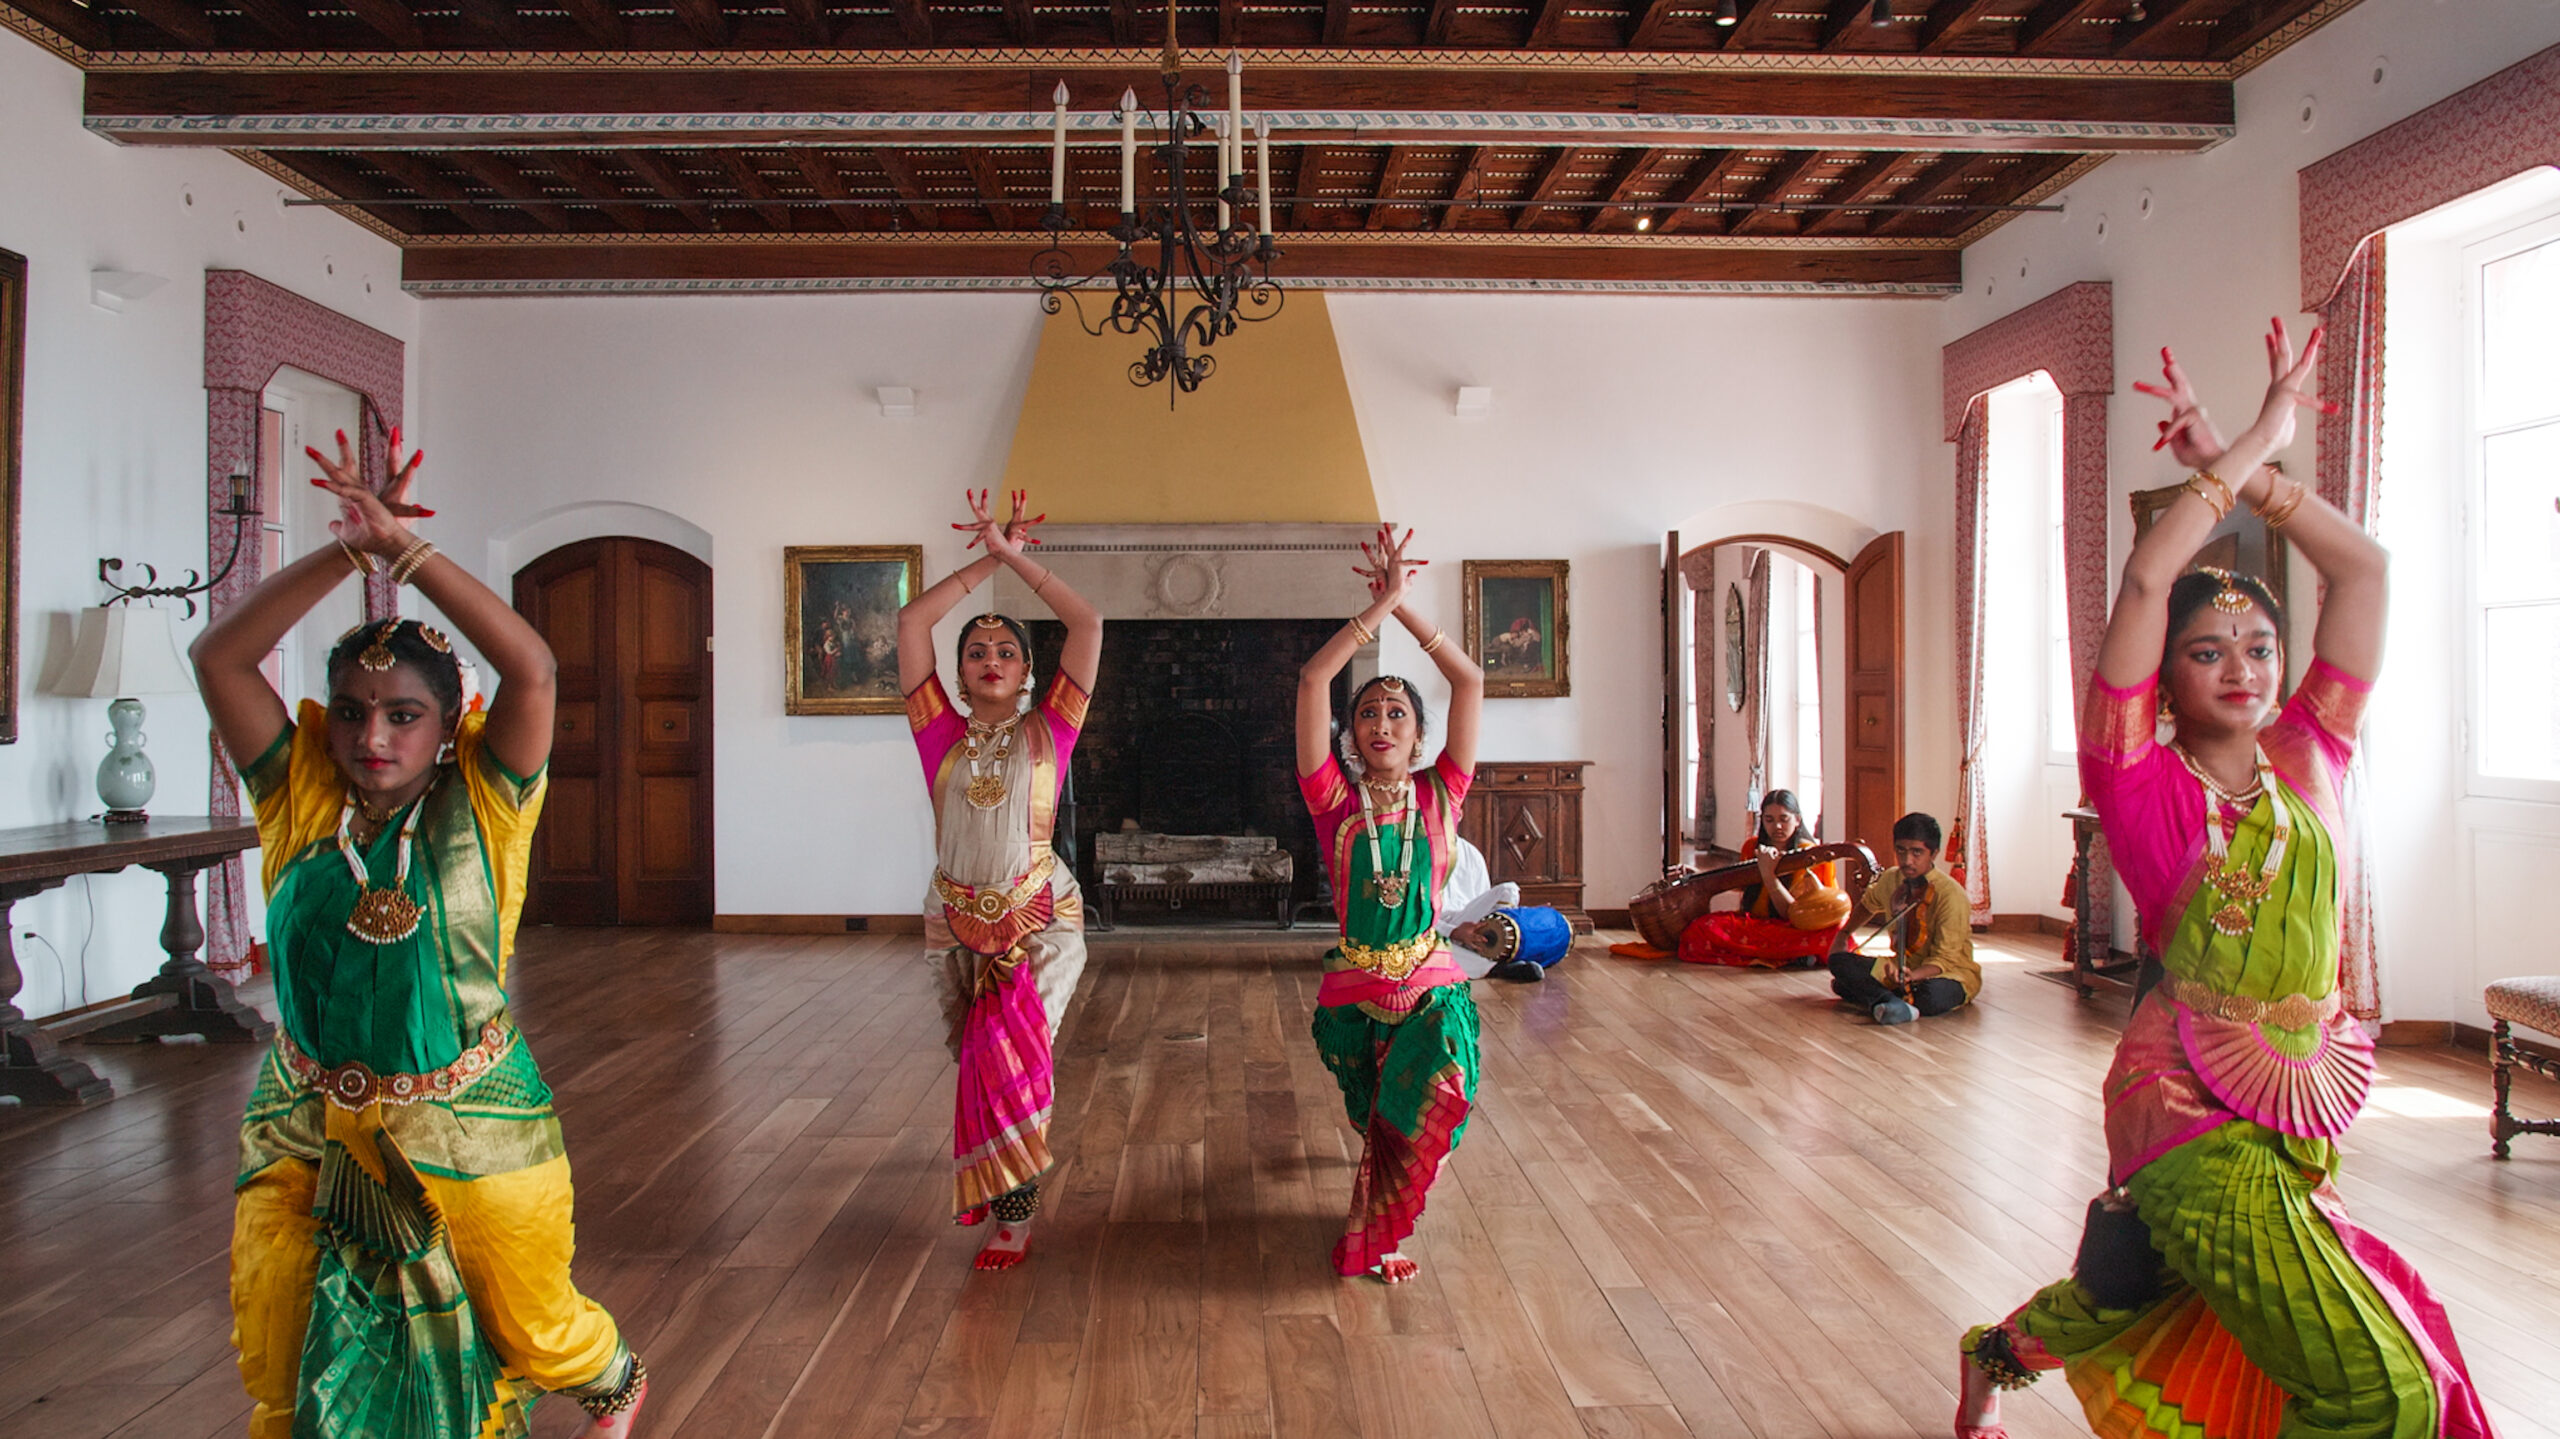 A group of people perform a Southern Indian classical music song and dance.